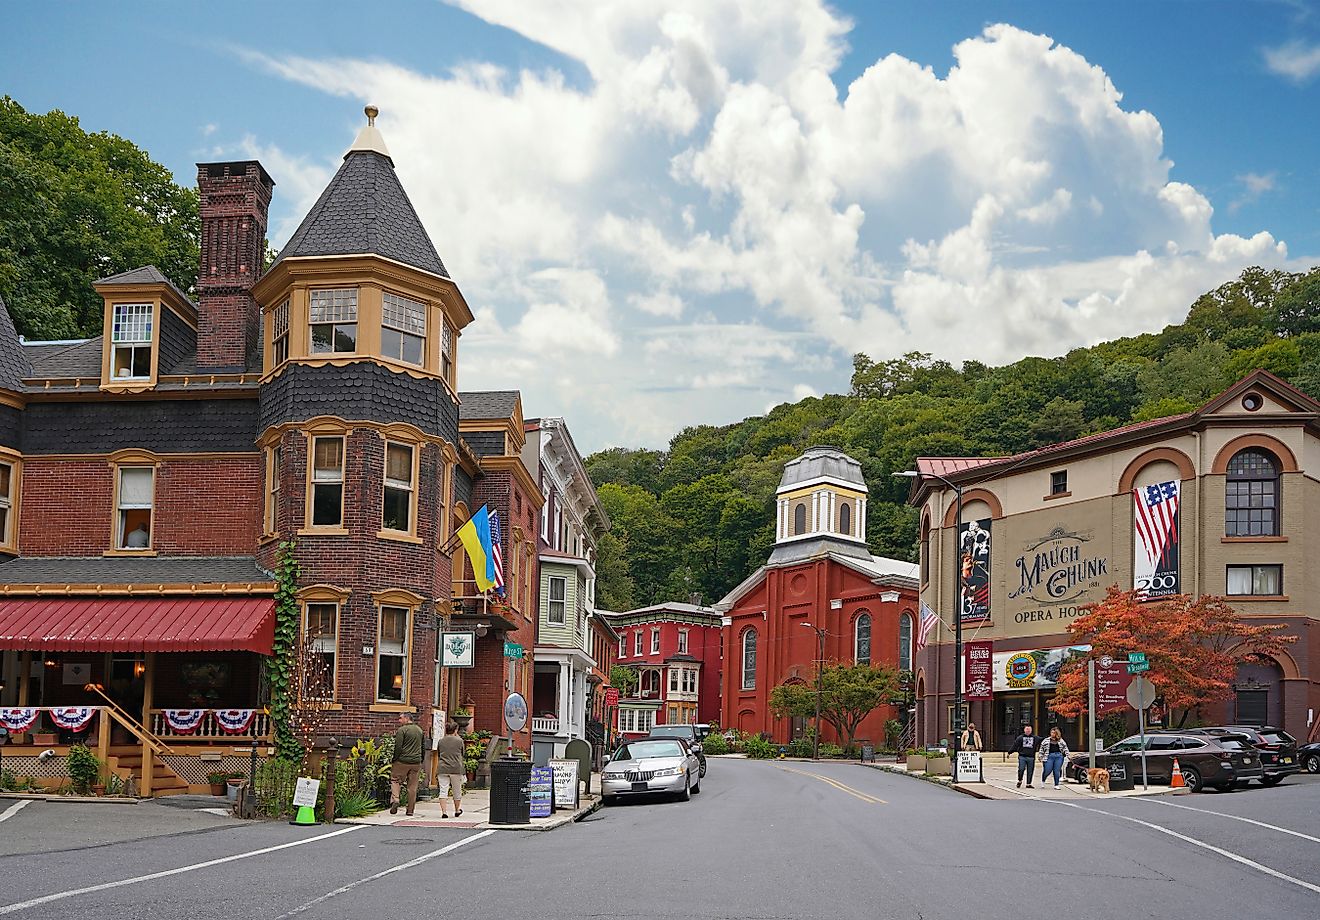 The Mauch Chunk Opera House in historic downtown Jim Thorpe.